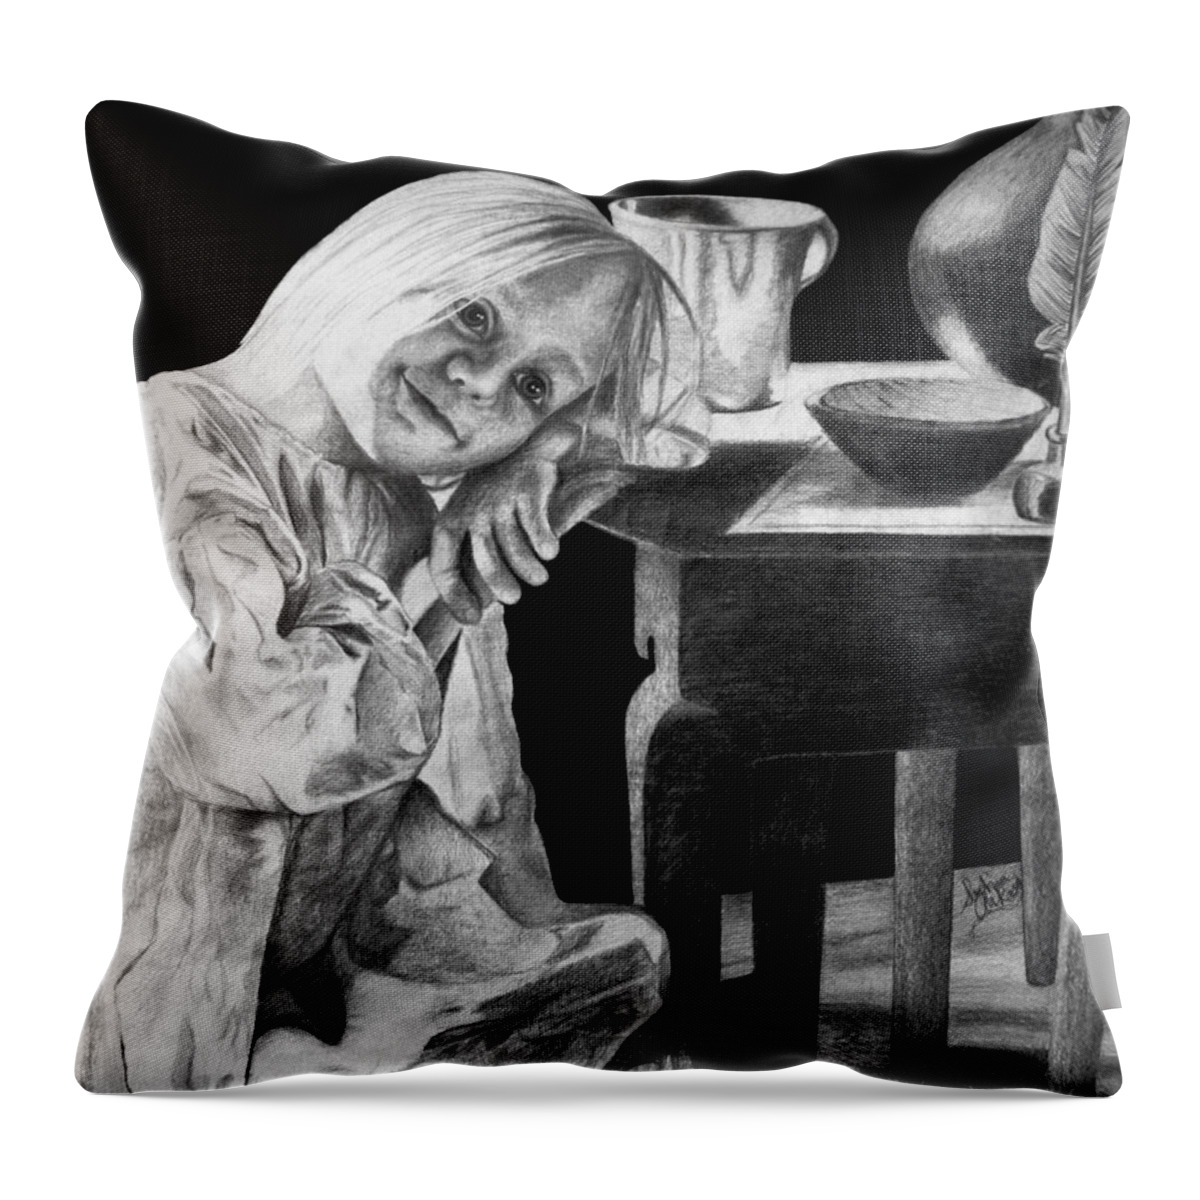 Girl Throw Pillow featuring the drawing Bedtime by SophiaArt Gallery